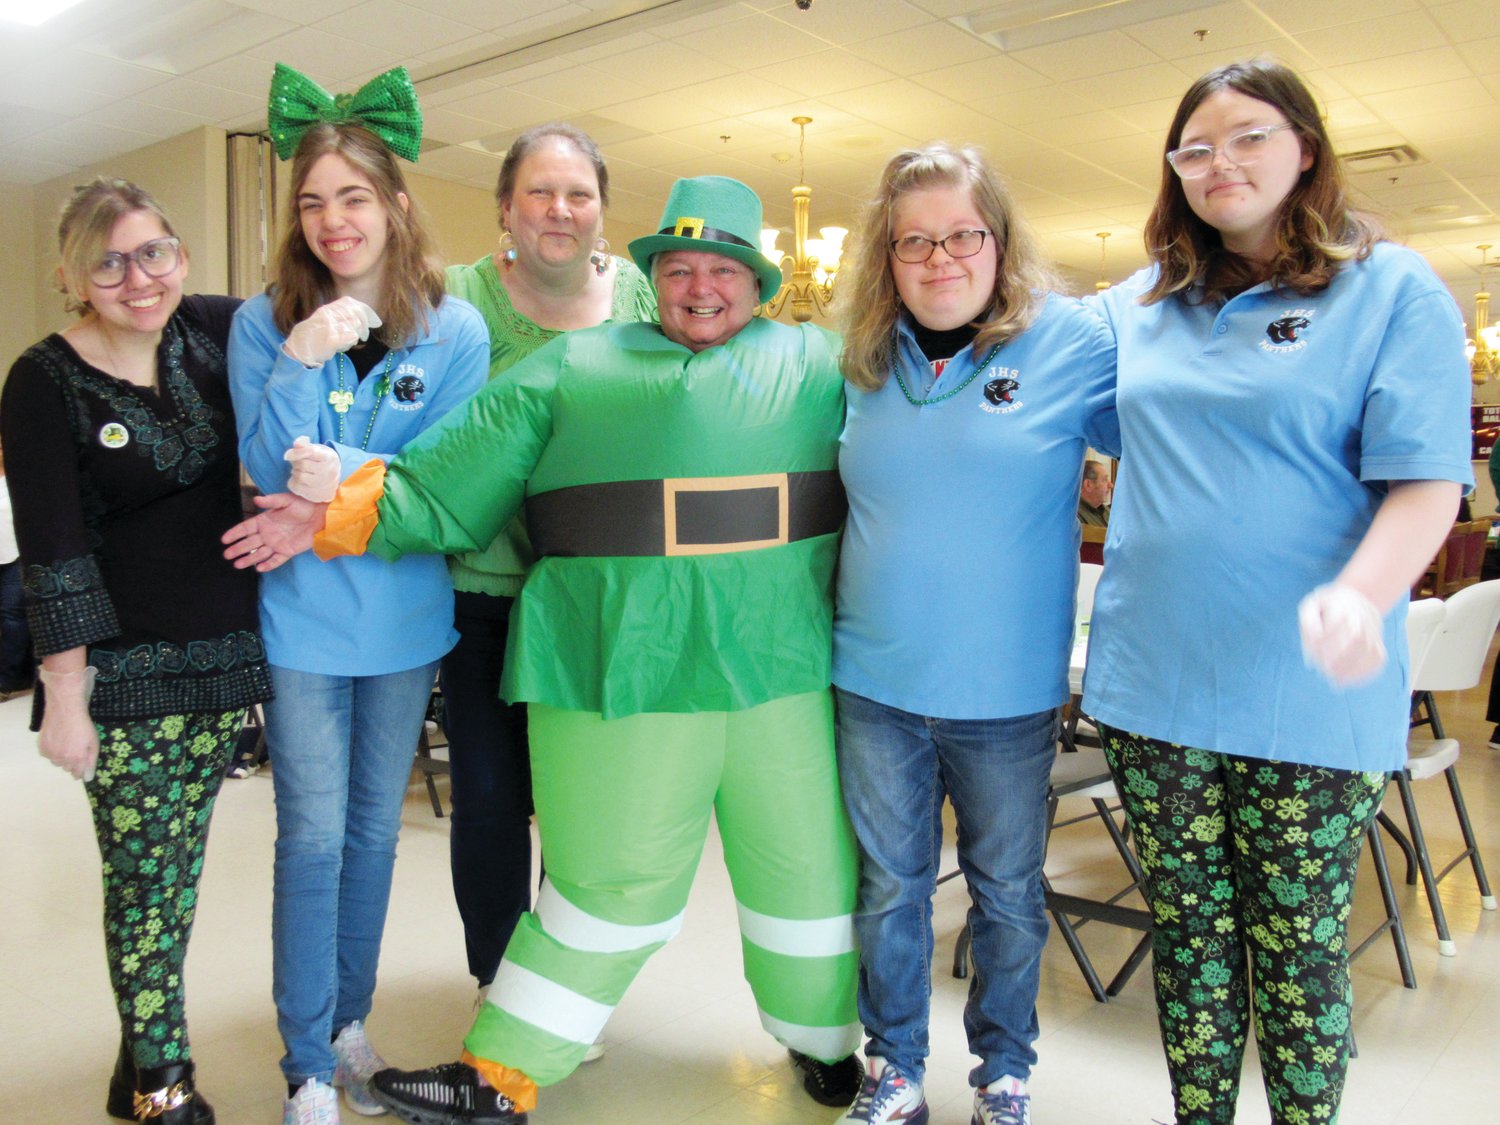 SUPER SERVERS: Singing sensation Katie Rodriguez (left) is joined by her JHS classmates Kayla Beaudry, Avery Ream and Hayden Judd as well as Louise Stanielon and “Leprechaun” Jackie Pion during last week’s JSC St. Patrick’s Day Party.